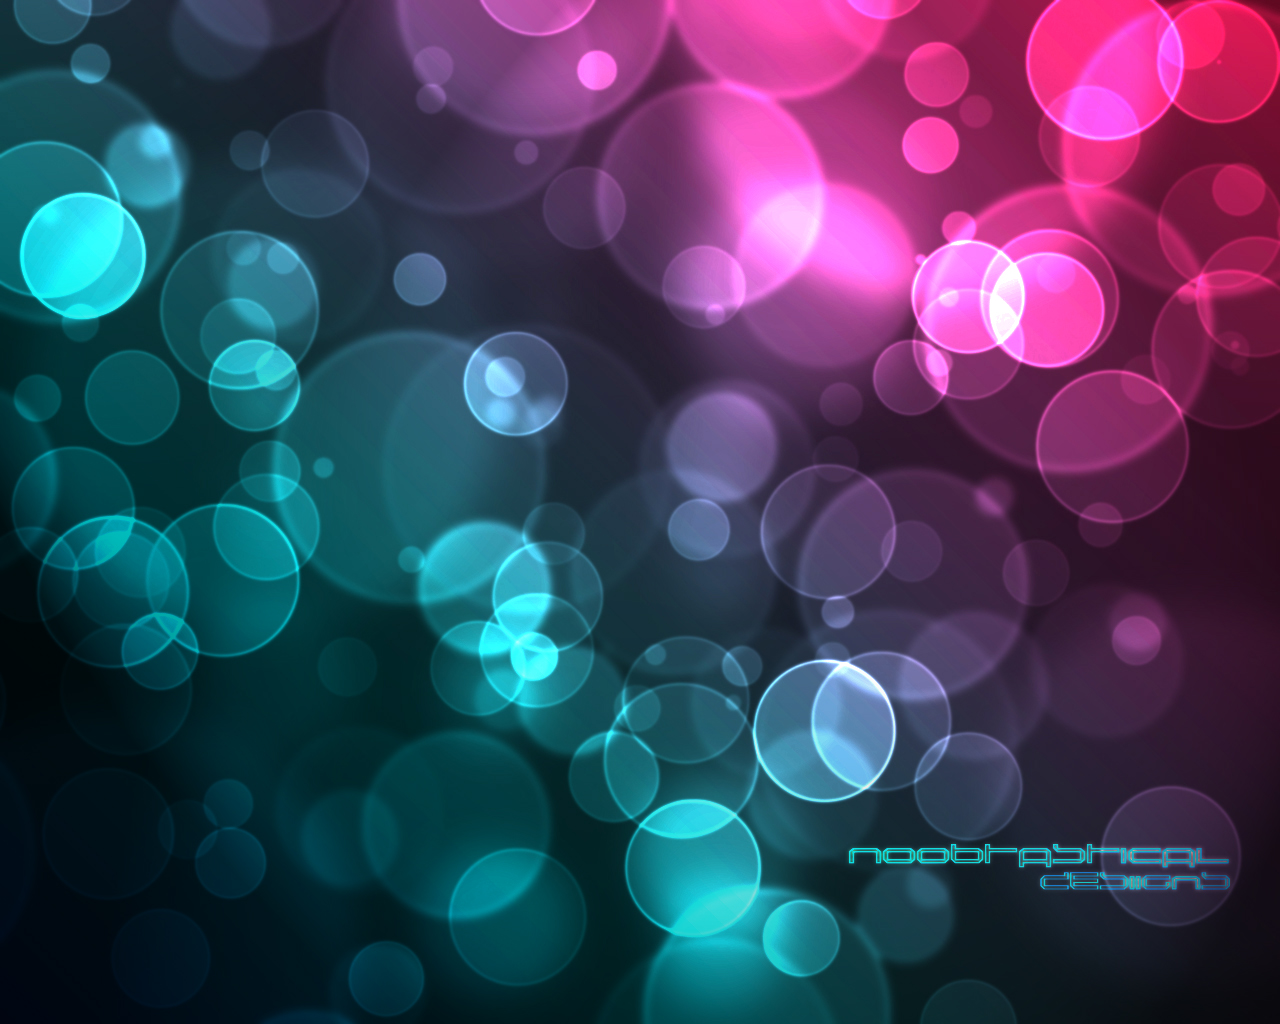 Bubbles Wallpaper. I made a new wallpaper! It is 1280×1024 (that is my 